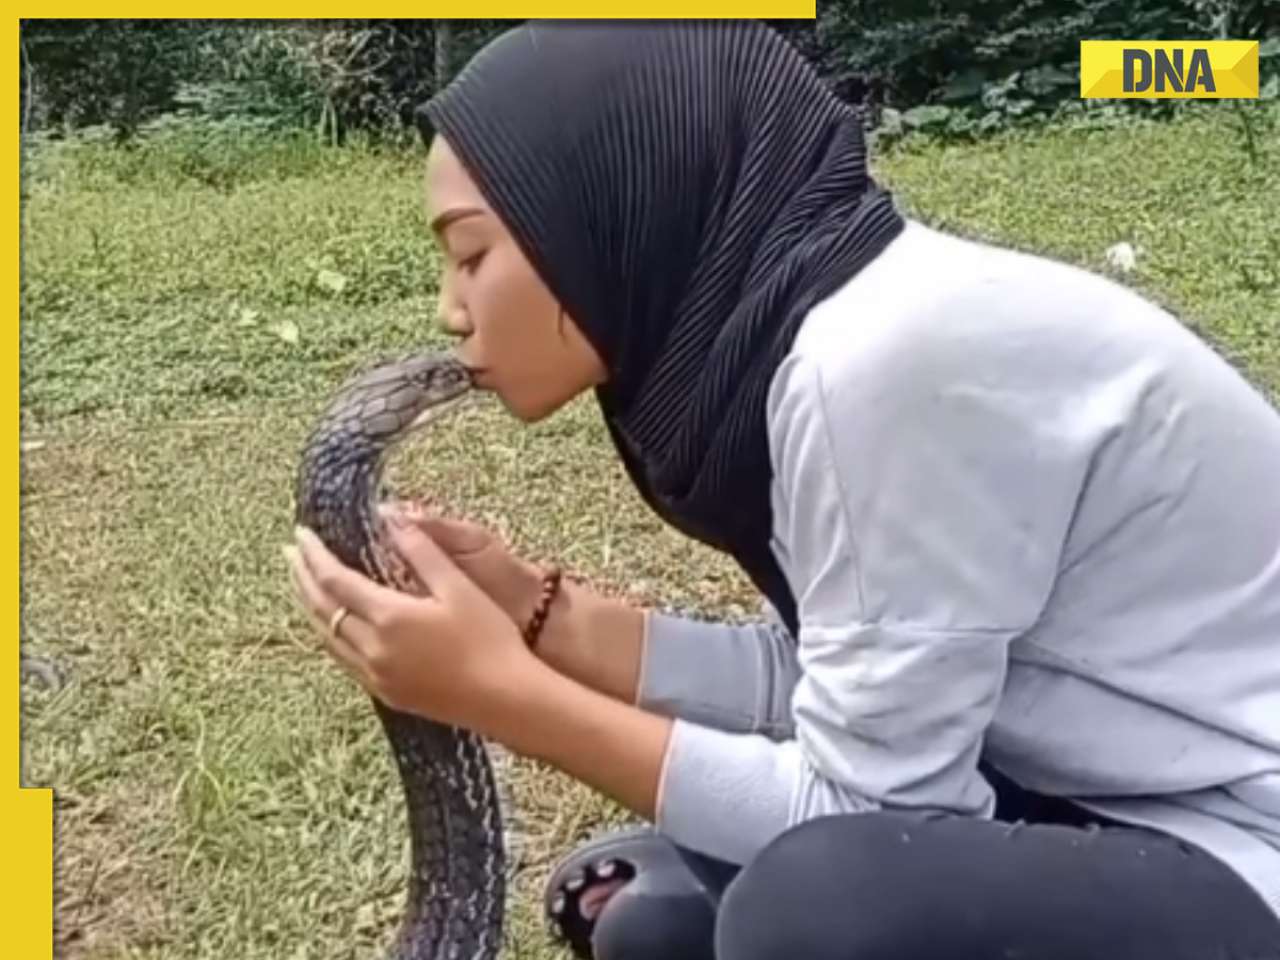 Woman kisses massive king cobra on head in viral video, internet reacts